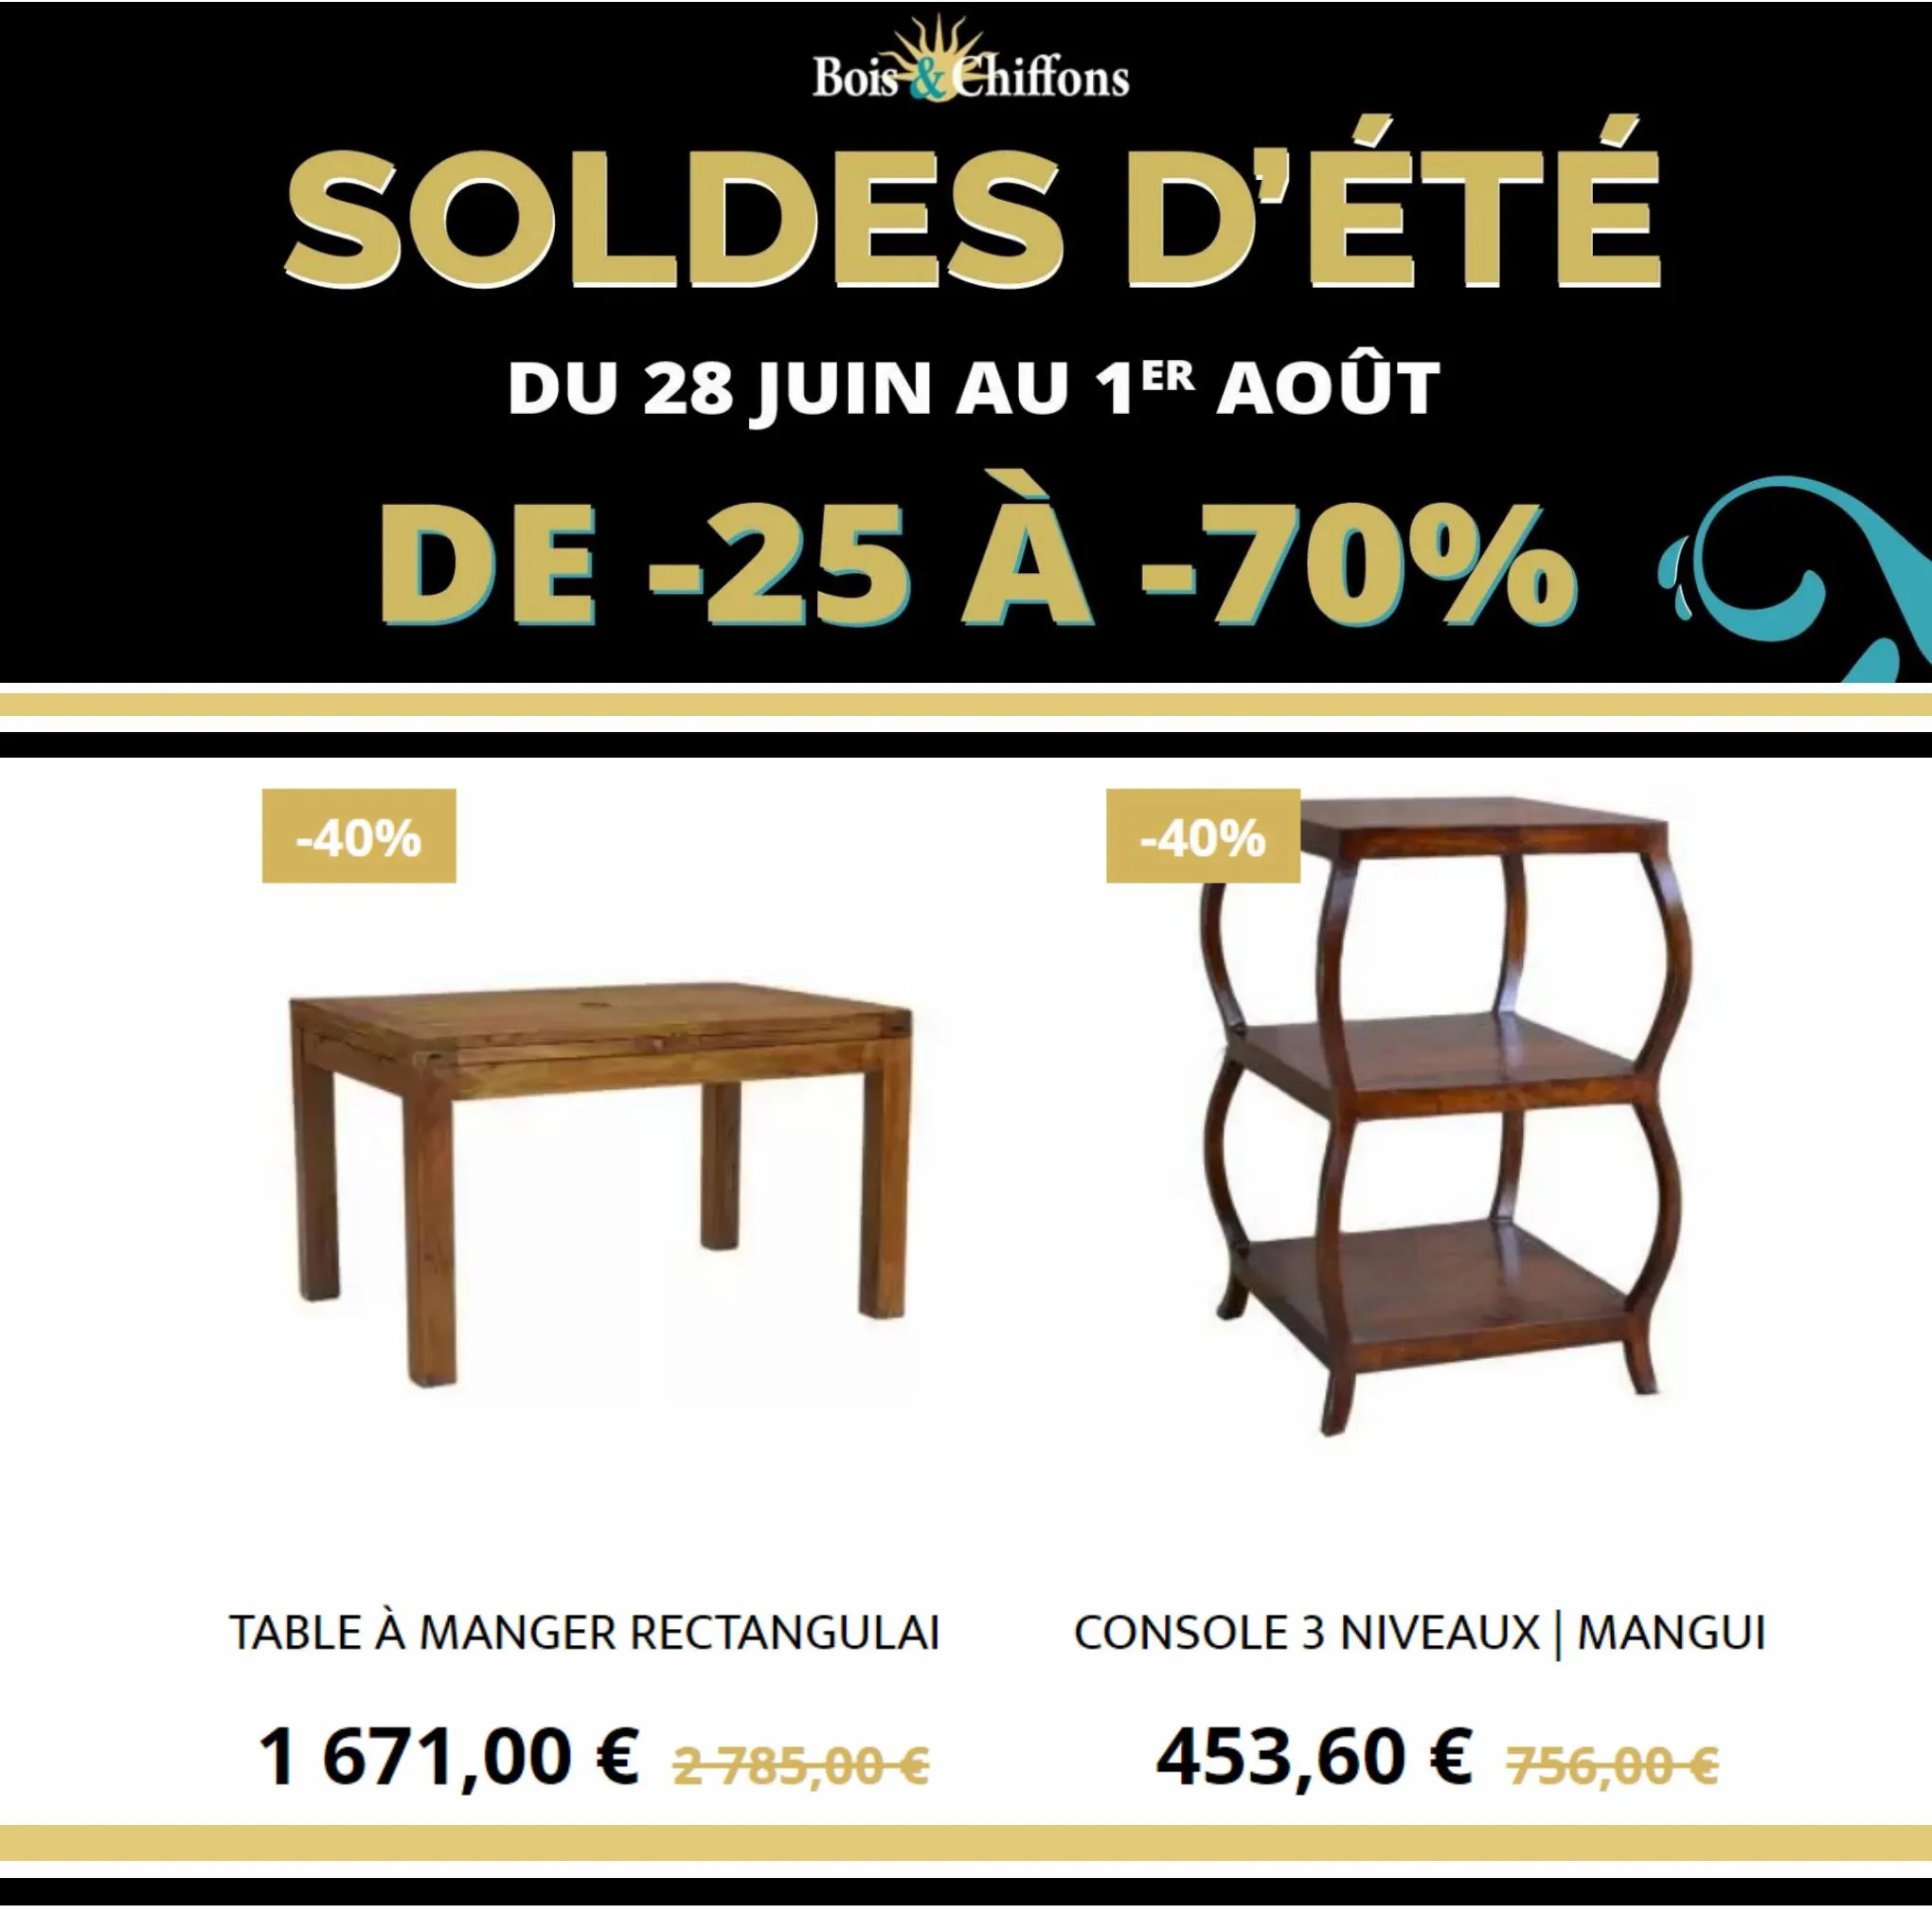 Catalogue Bois & Chiffons Soldes, page 00001